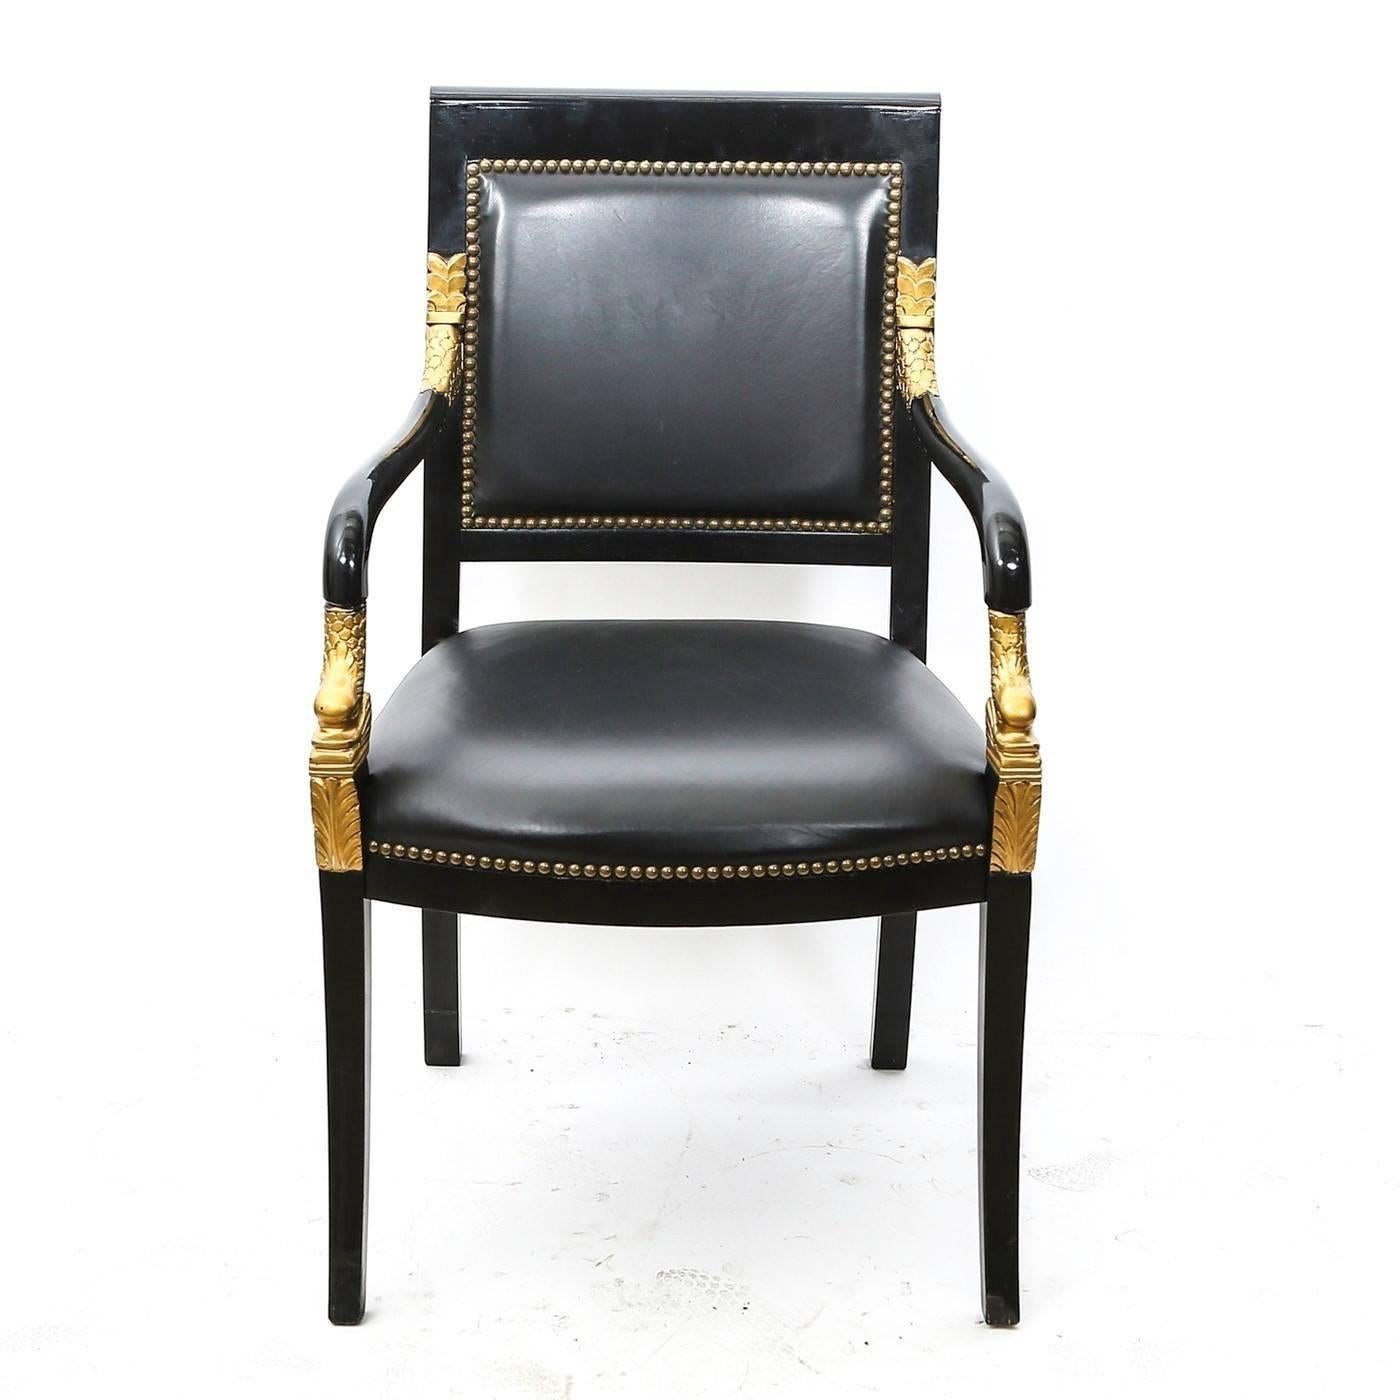 This lovely versatile set feature frames made of mahogany lacquered wood. Features an upholstered back with nailhead trim over an upholstered seat flanked by sloped arms with gilded carved dolphin form. Leather upholstery. The sabre front and back